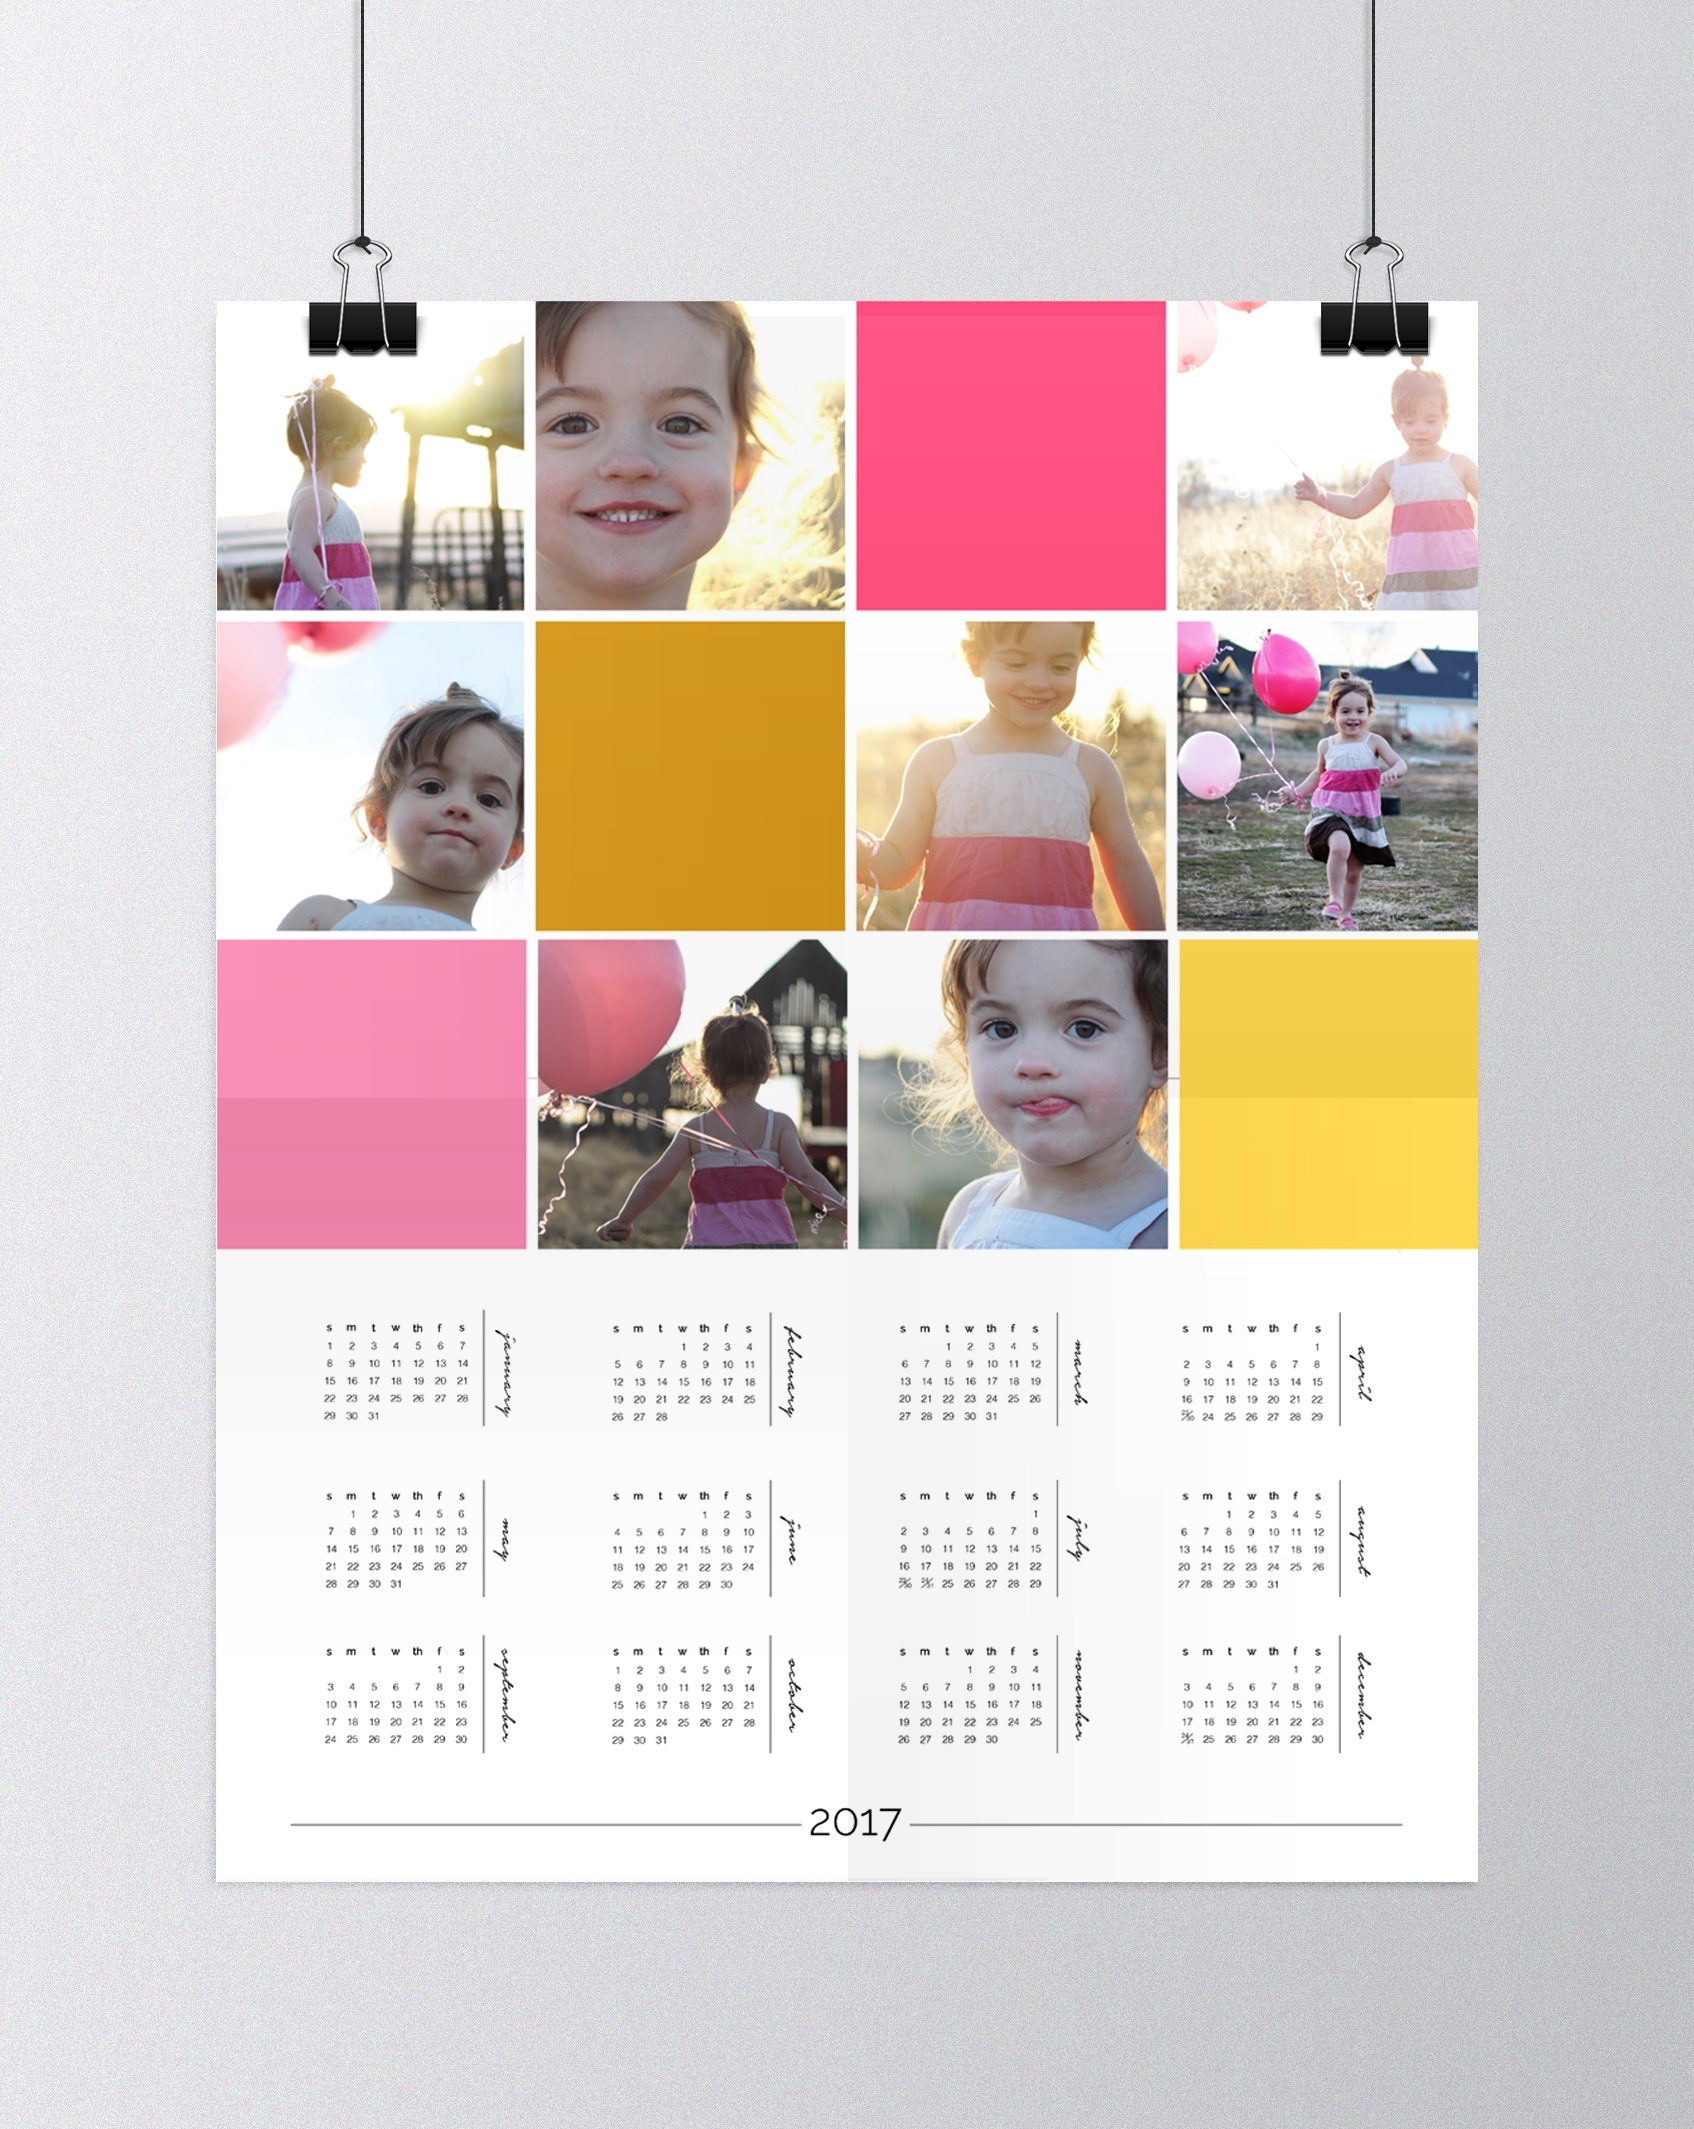 Make A Personalized Photo Wall Calendar + Photoshop Elements Making A Calendar Template In Photoshop